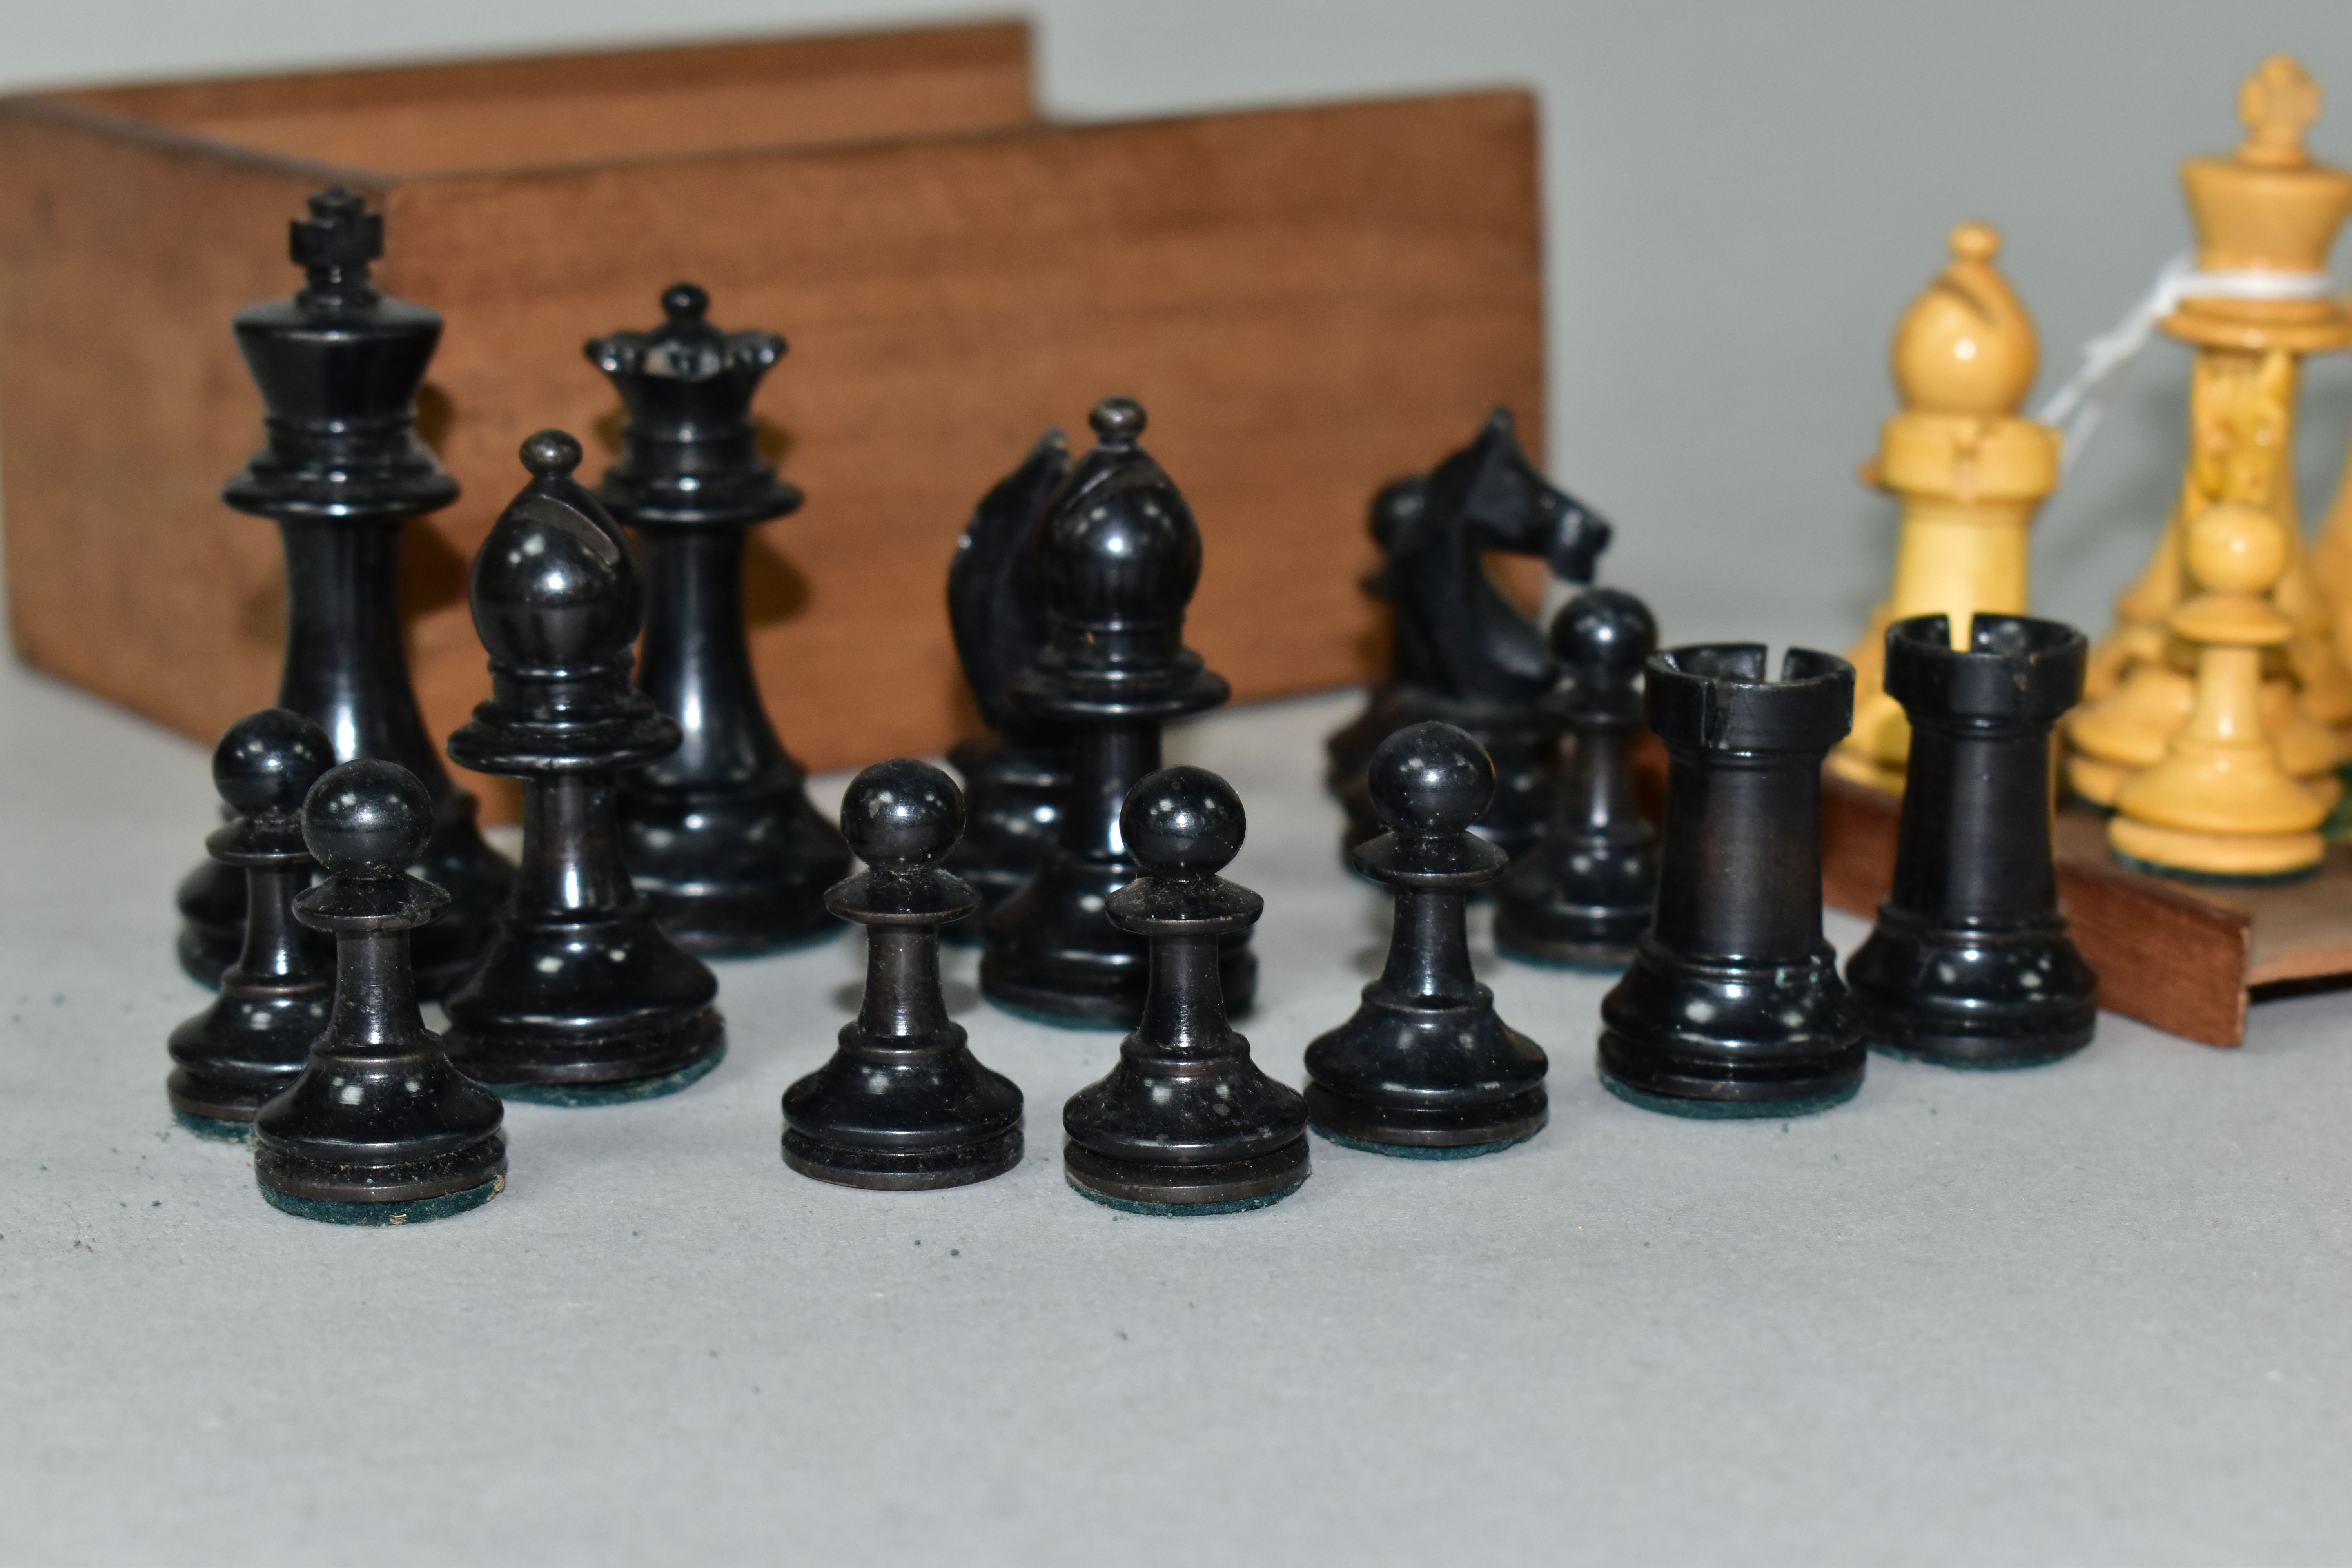 A BOXED WOODEN ORIGINAL CHESS SET, all pieces present, no obvious damage (1) - Image 2 of 5